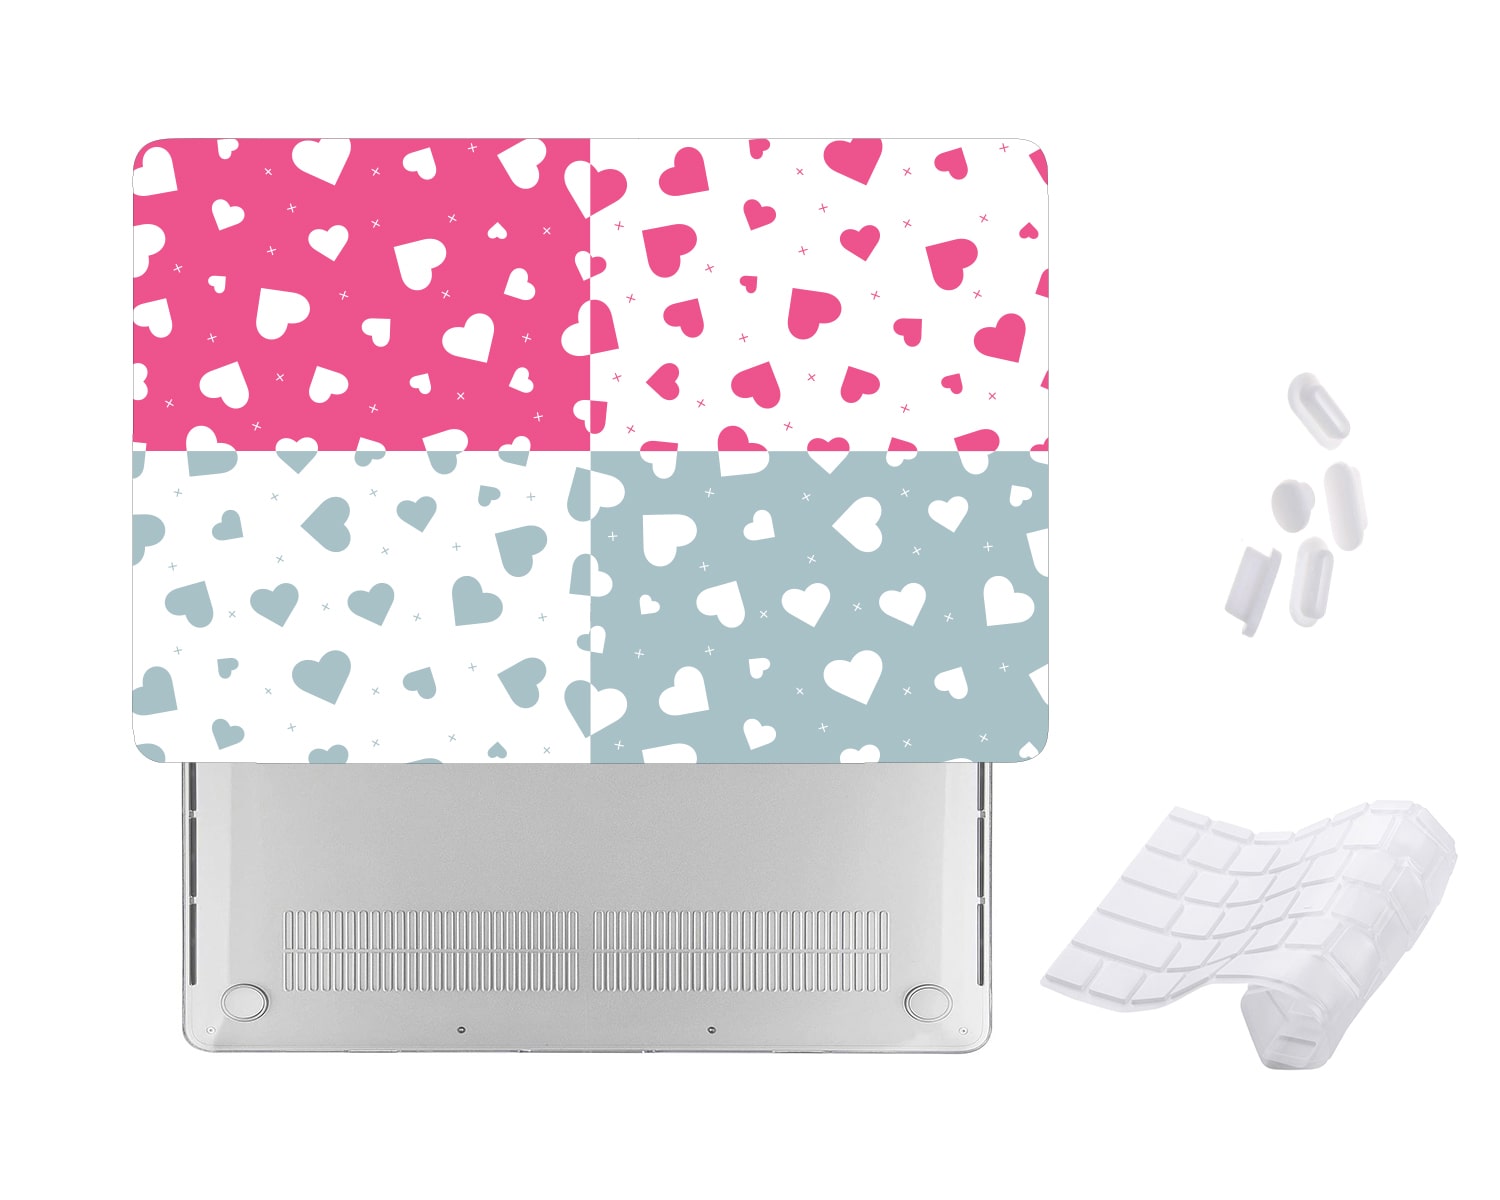 Case Cover for Macbook - Love Hearts Pattern Design